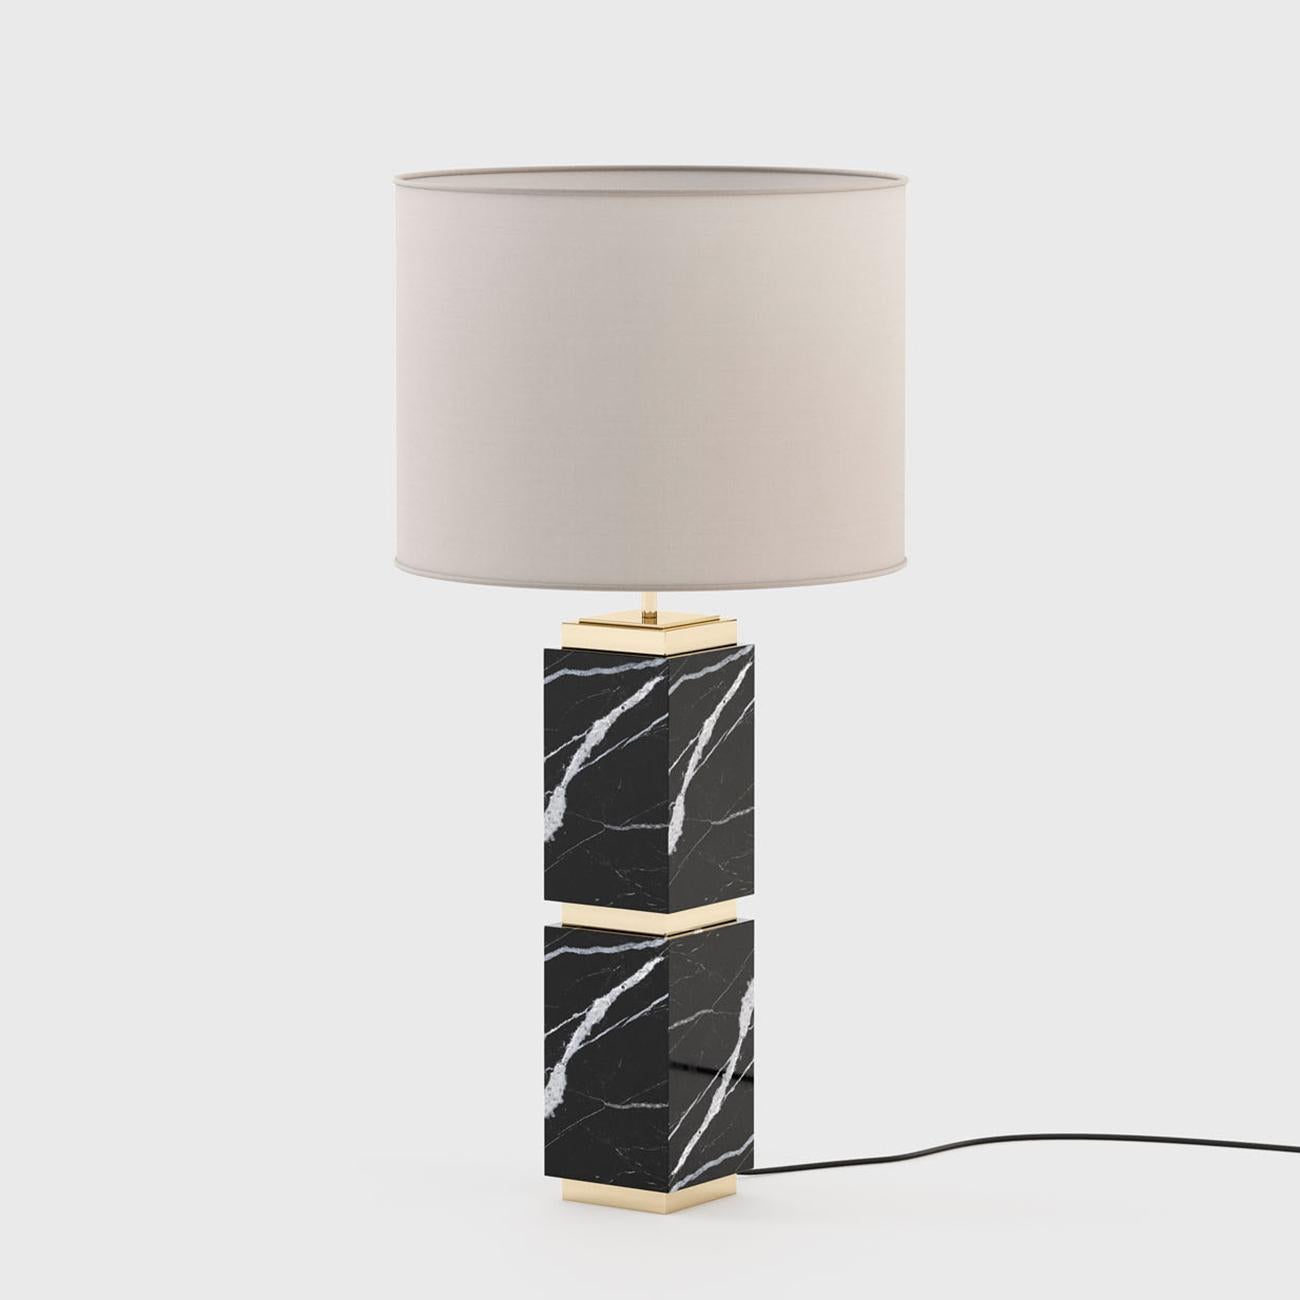 Table lamp Empire black marble with 
solid black marble base and with
polished stainless steel in gold finish.
Including a white coton shade. 1 bulb,
lamp holder type E27, max 40 Watt.
Bulb not included. Base: 15cm x 15cm.